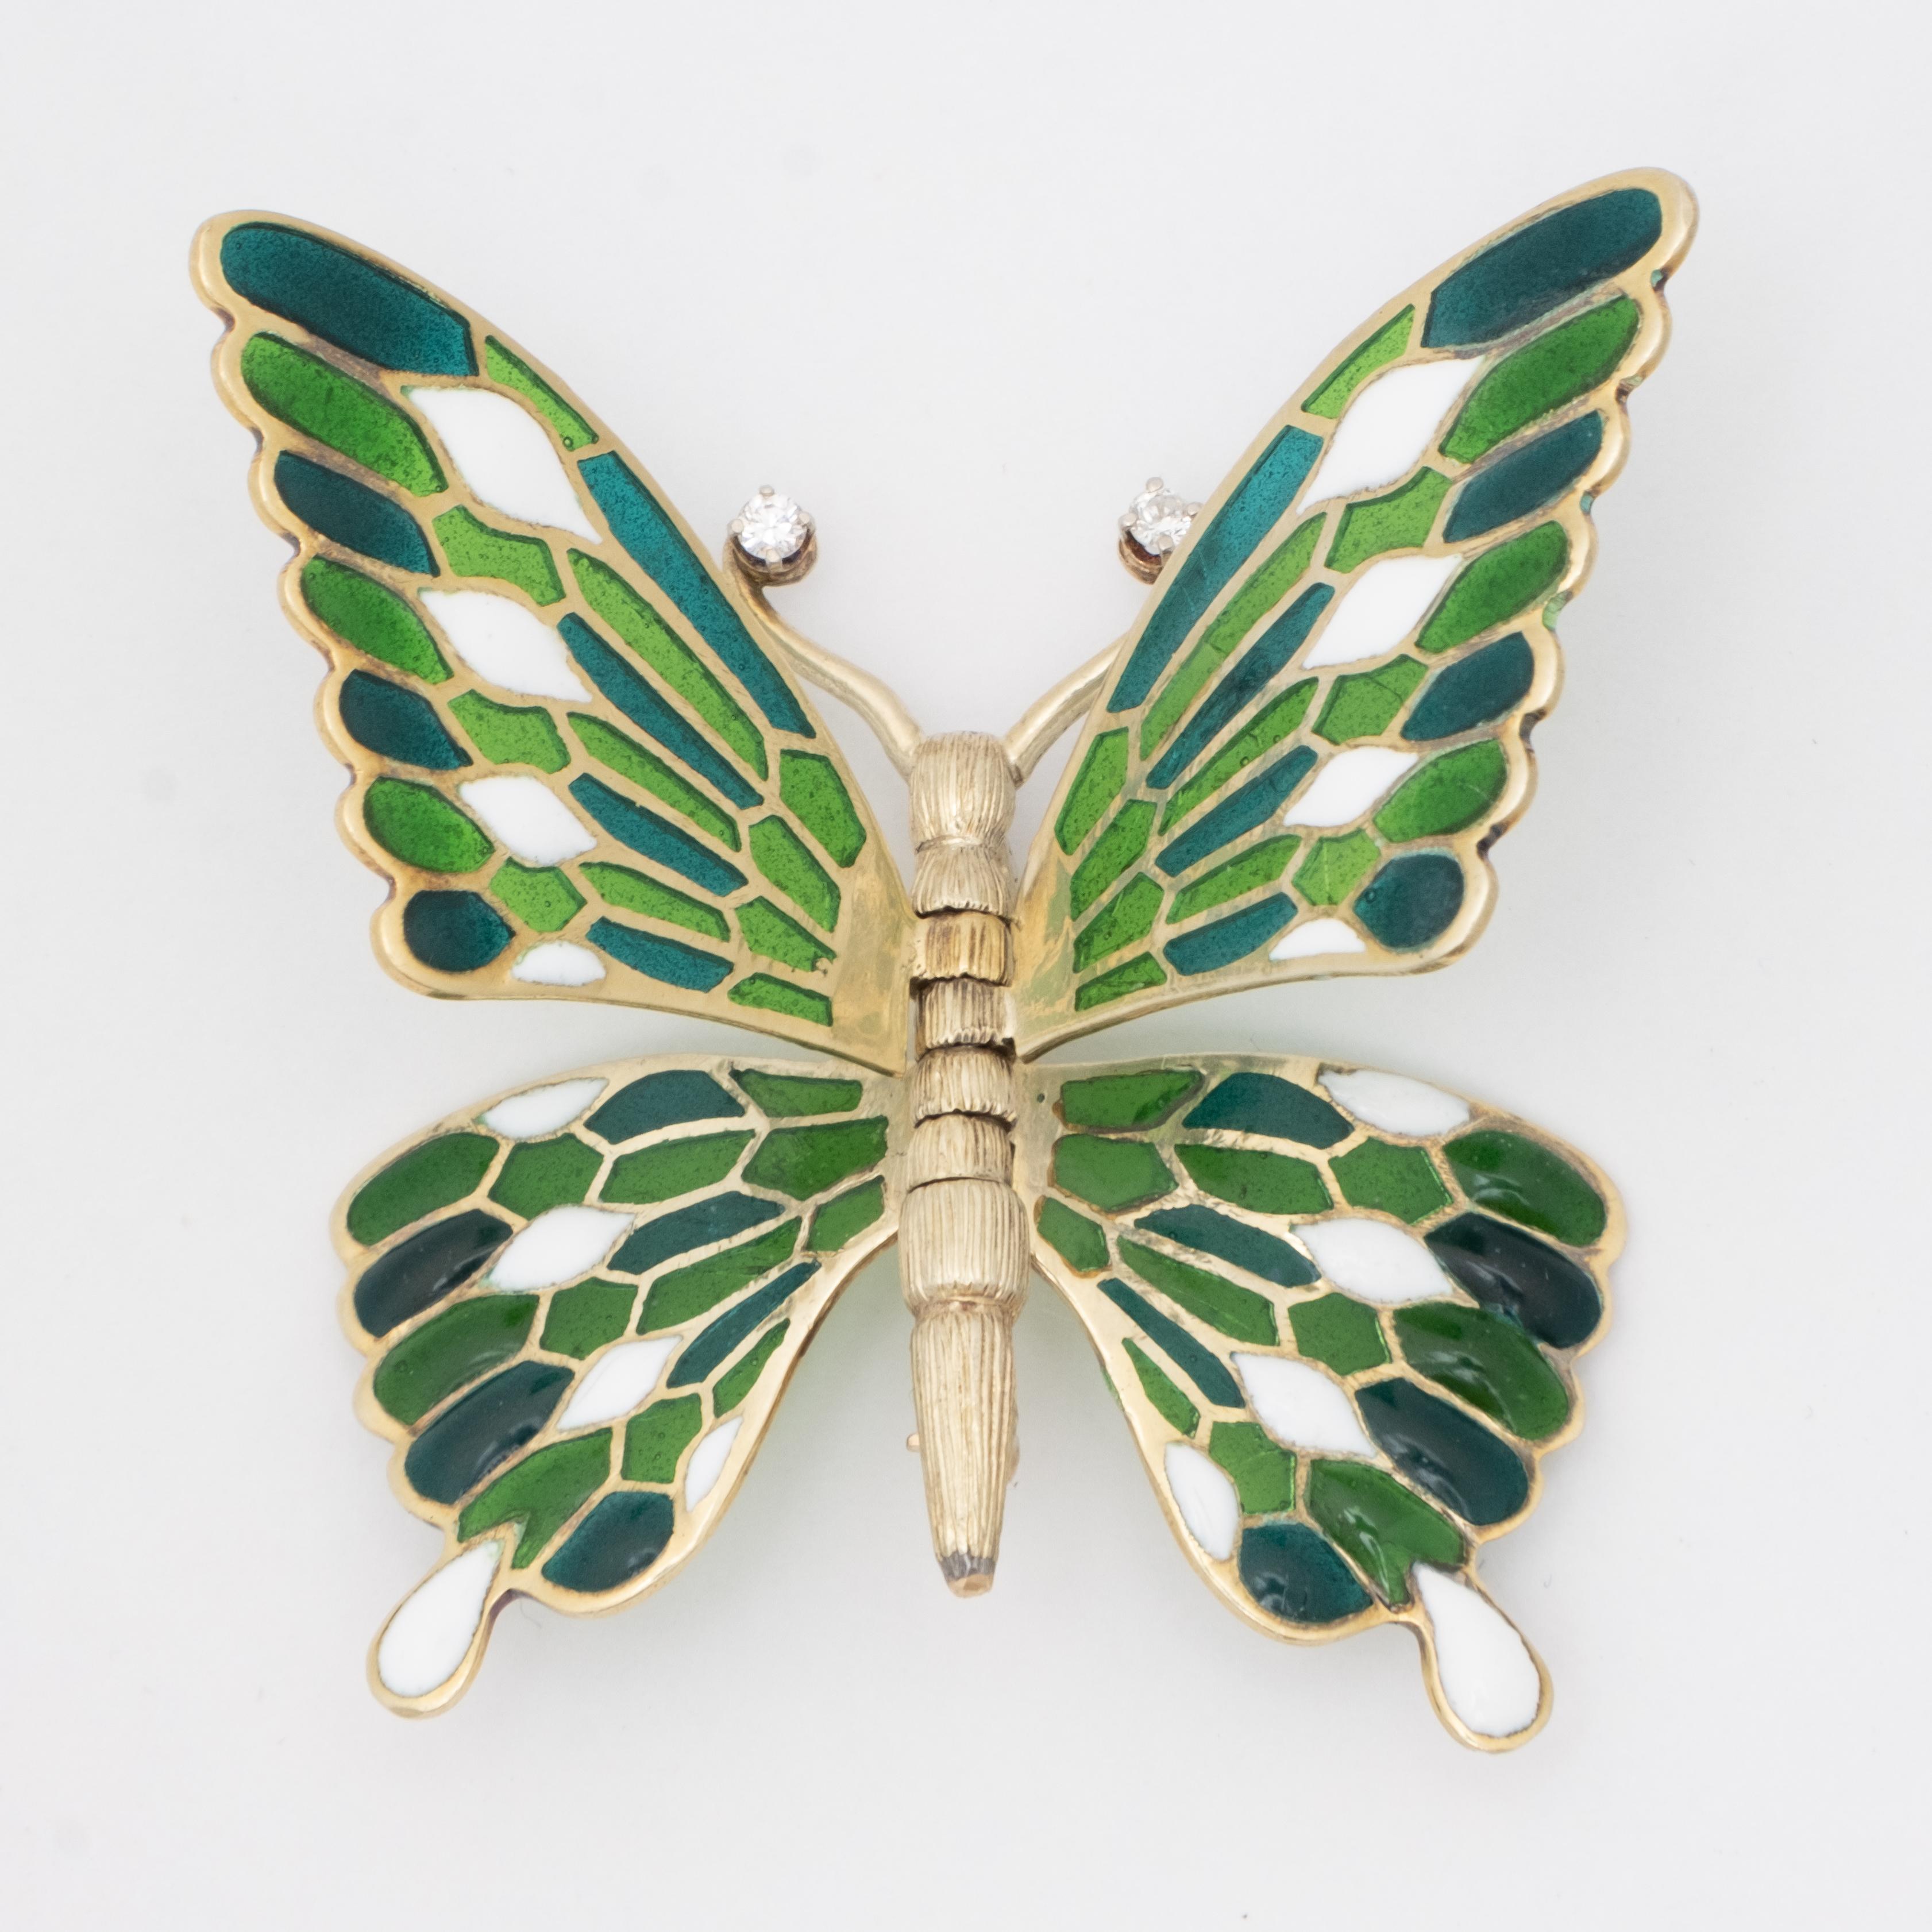 An elegant 18k plique-à-jour diamond butterfly brooch with hinged wings. A single diamond at the end of each antenna. The enameled wings swivel on the body of the butterfly, which is florentine in style, allowing various configurations of wings,